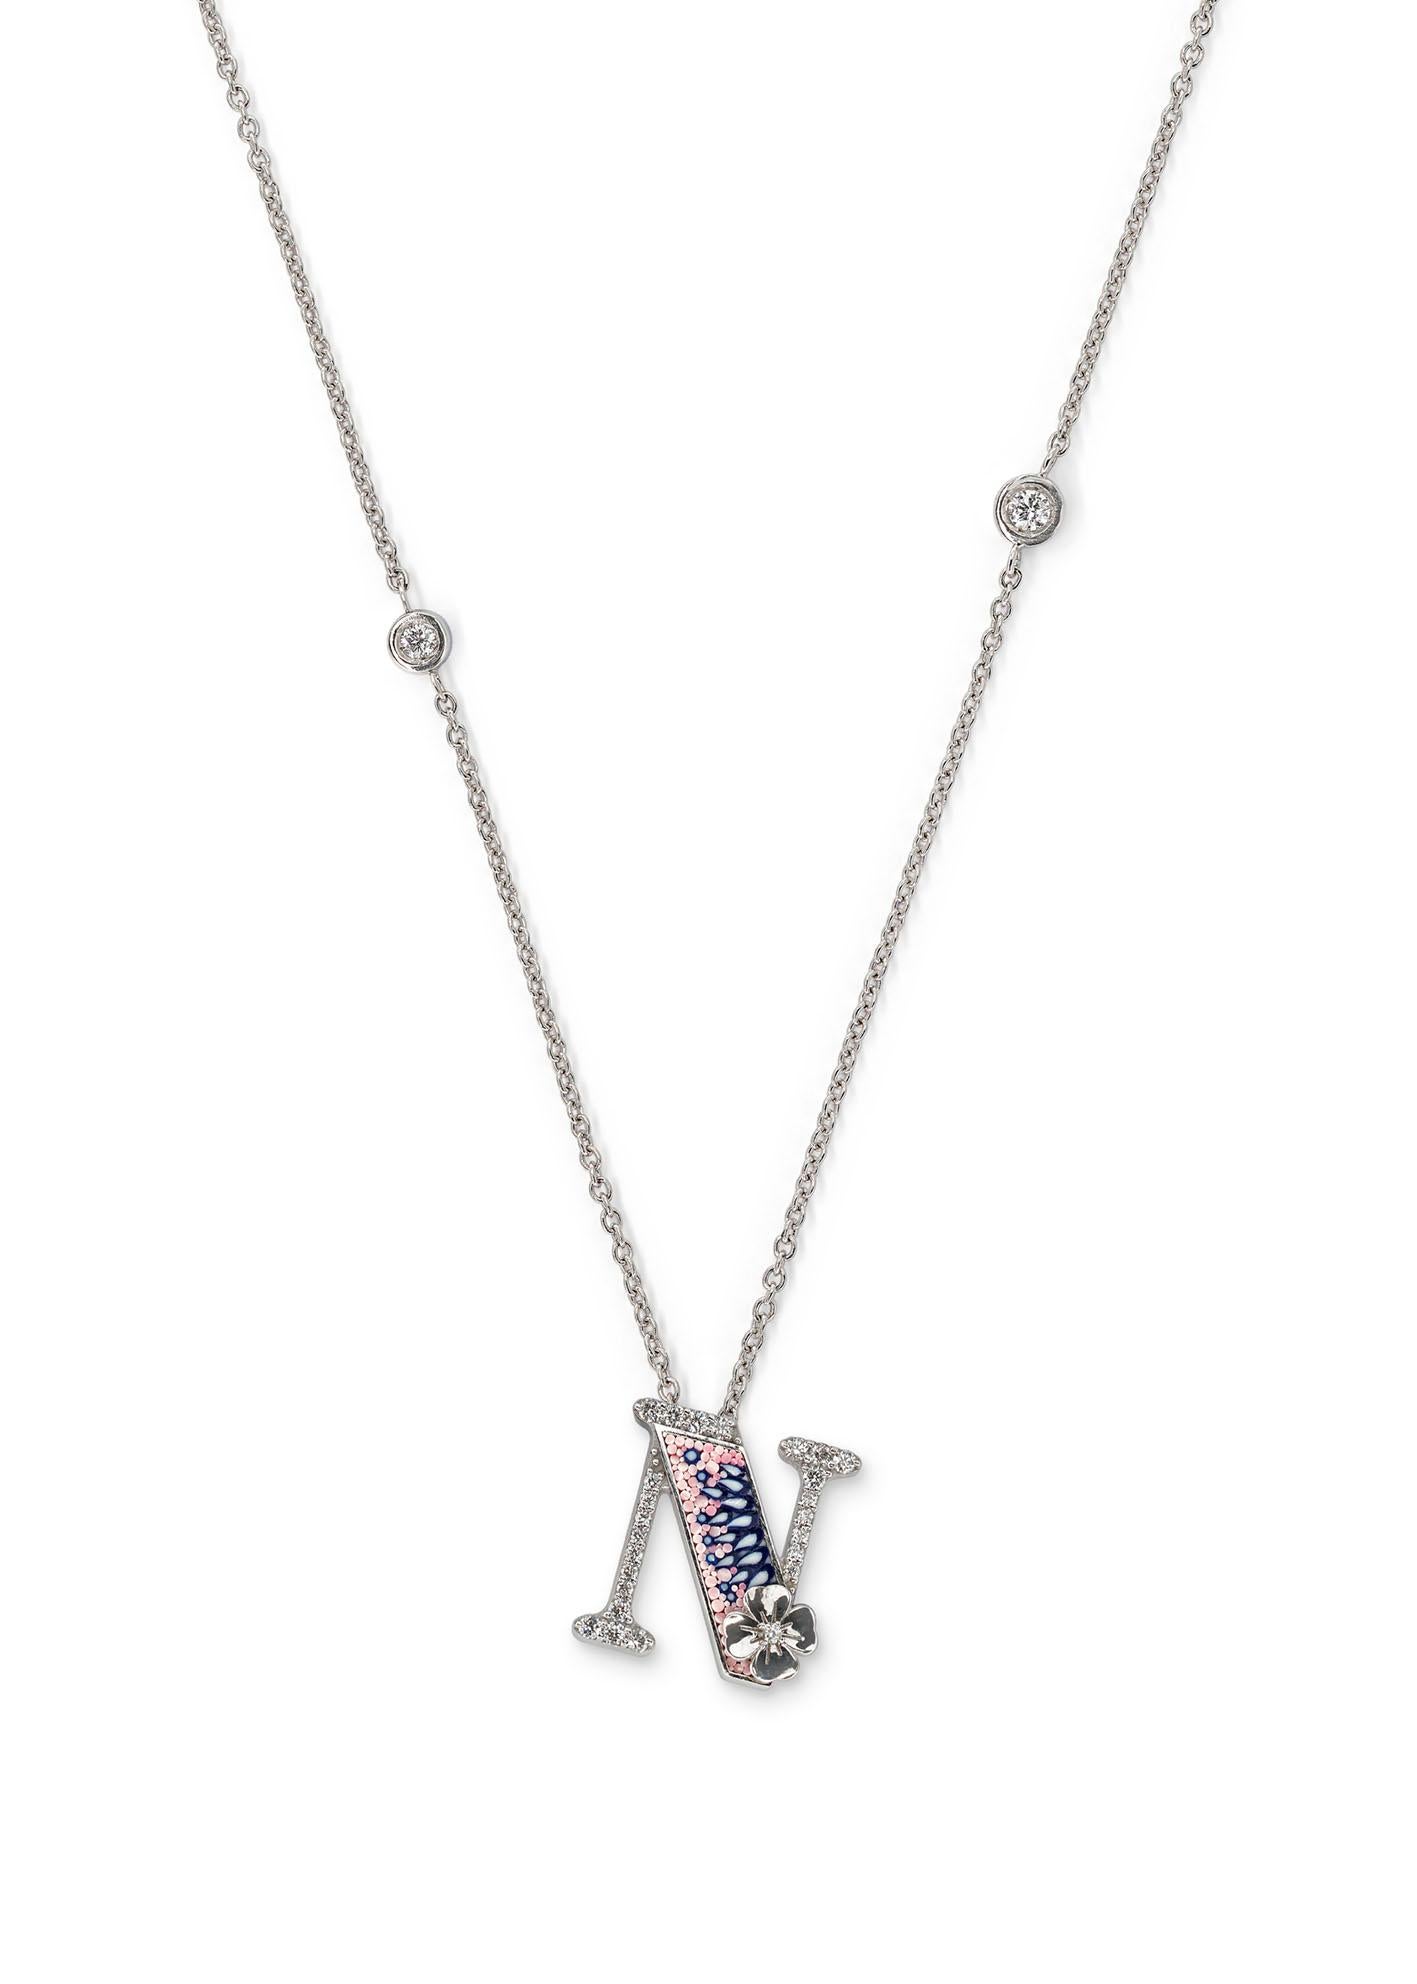 Brilliant Cut Necklace Letter N White Gold White Diamonds Hand Decorated with Micromosaic For Sale